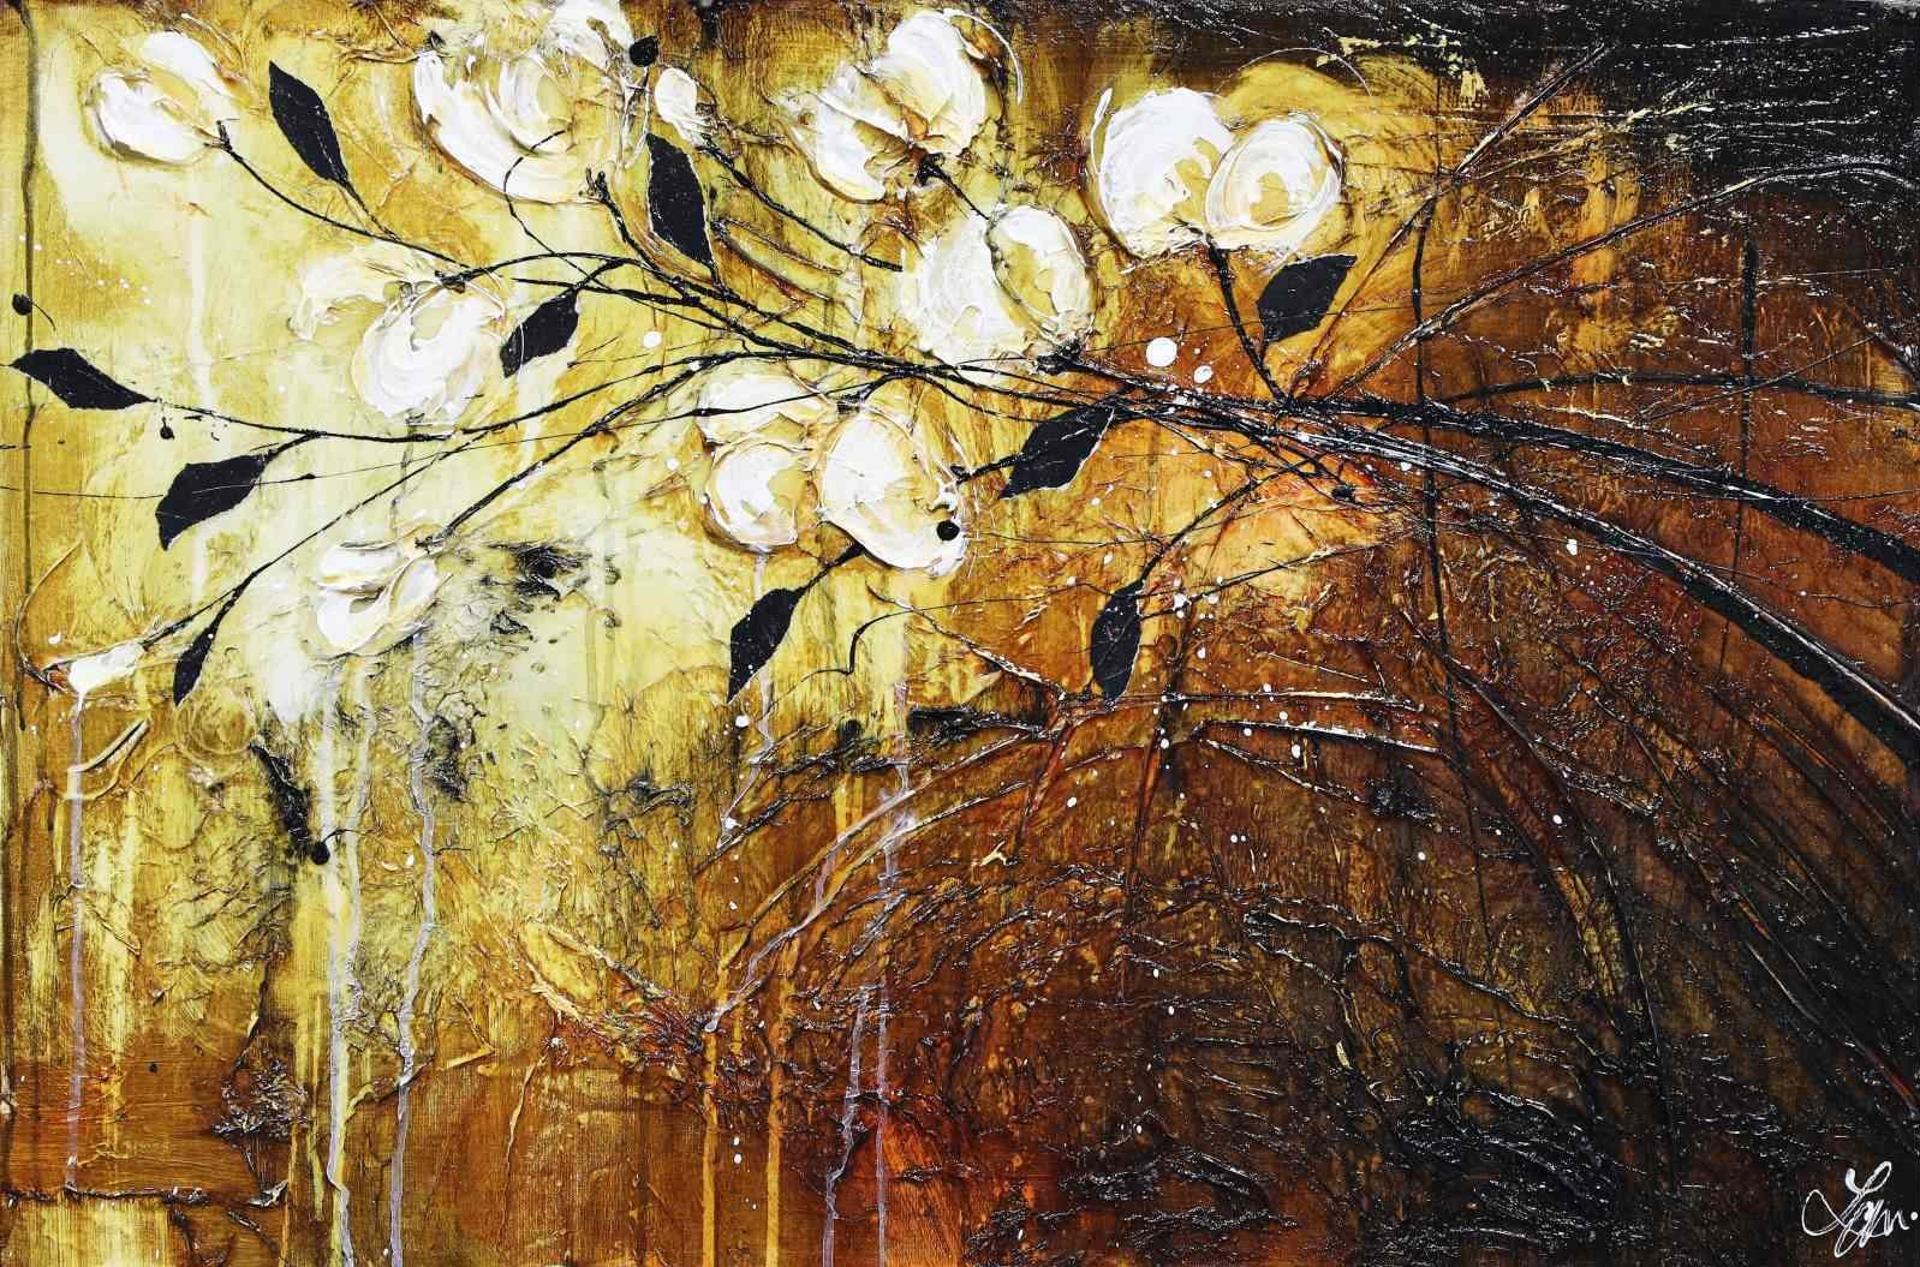 Laura Harris - With The Warmth; 2013